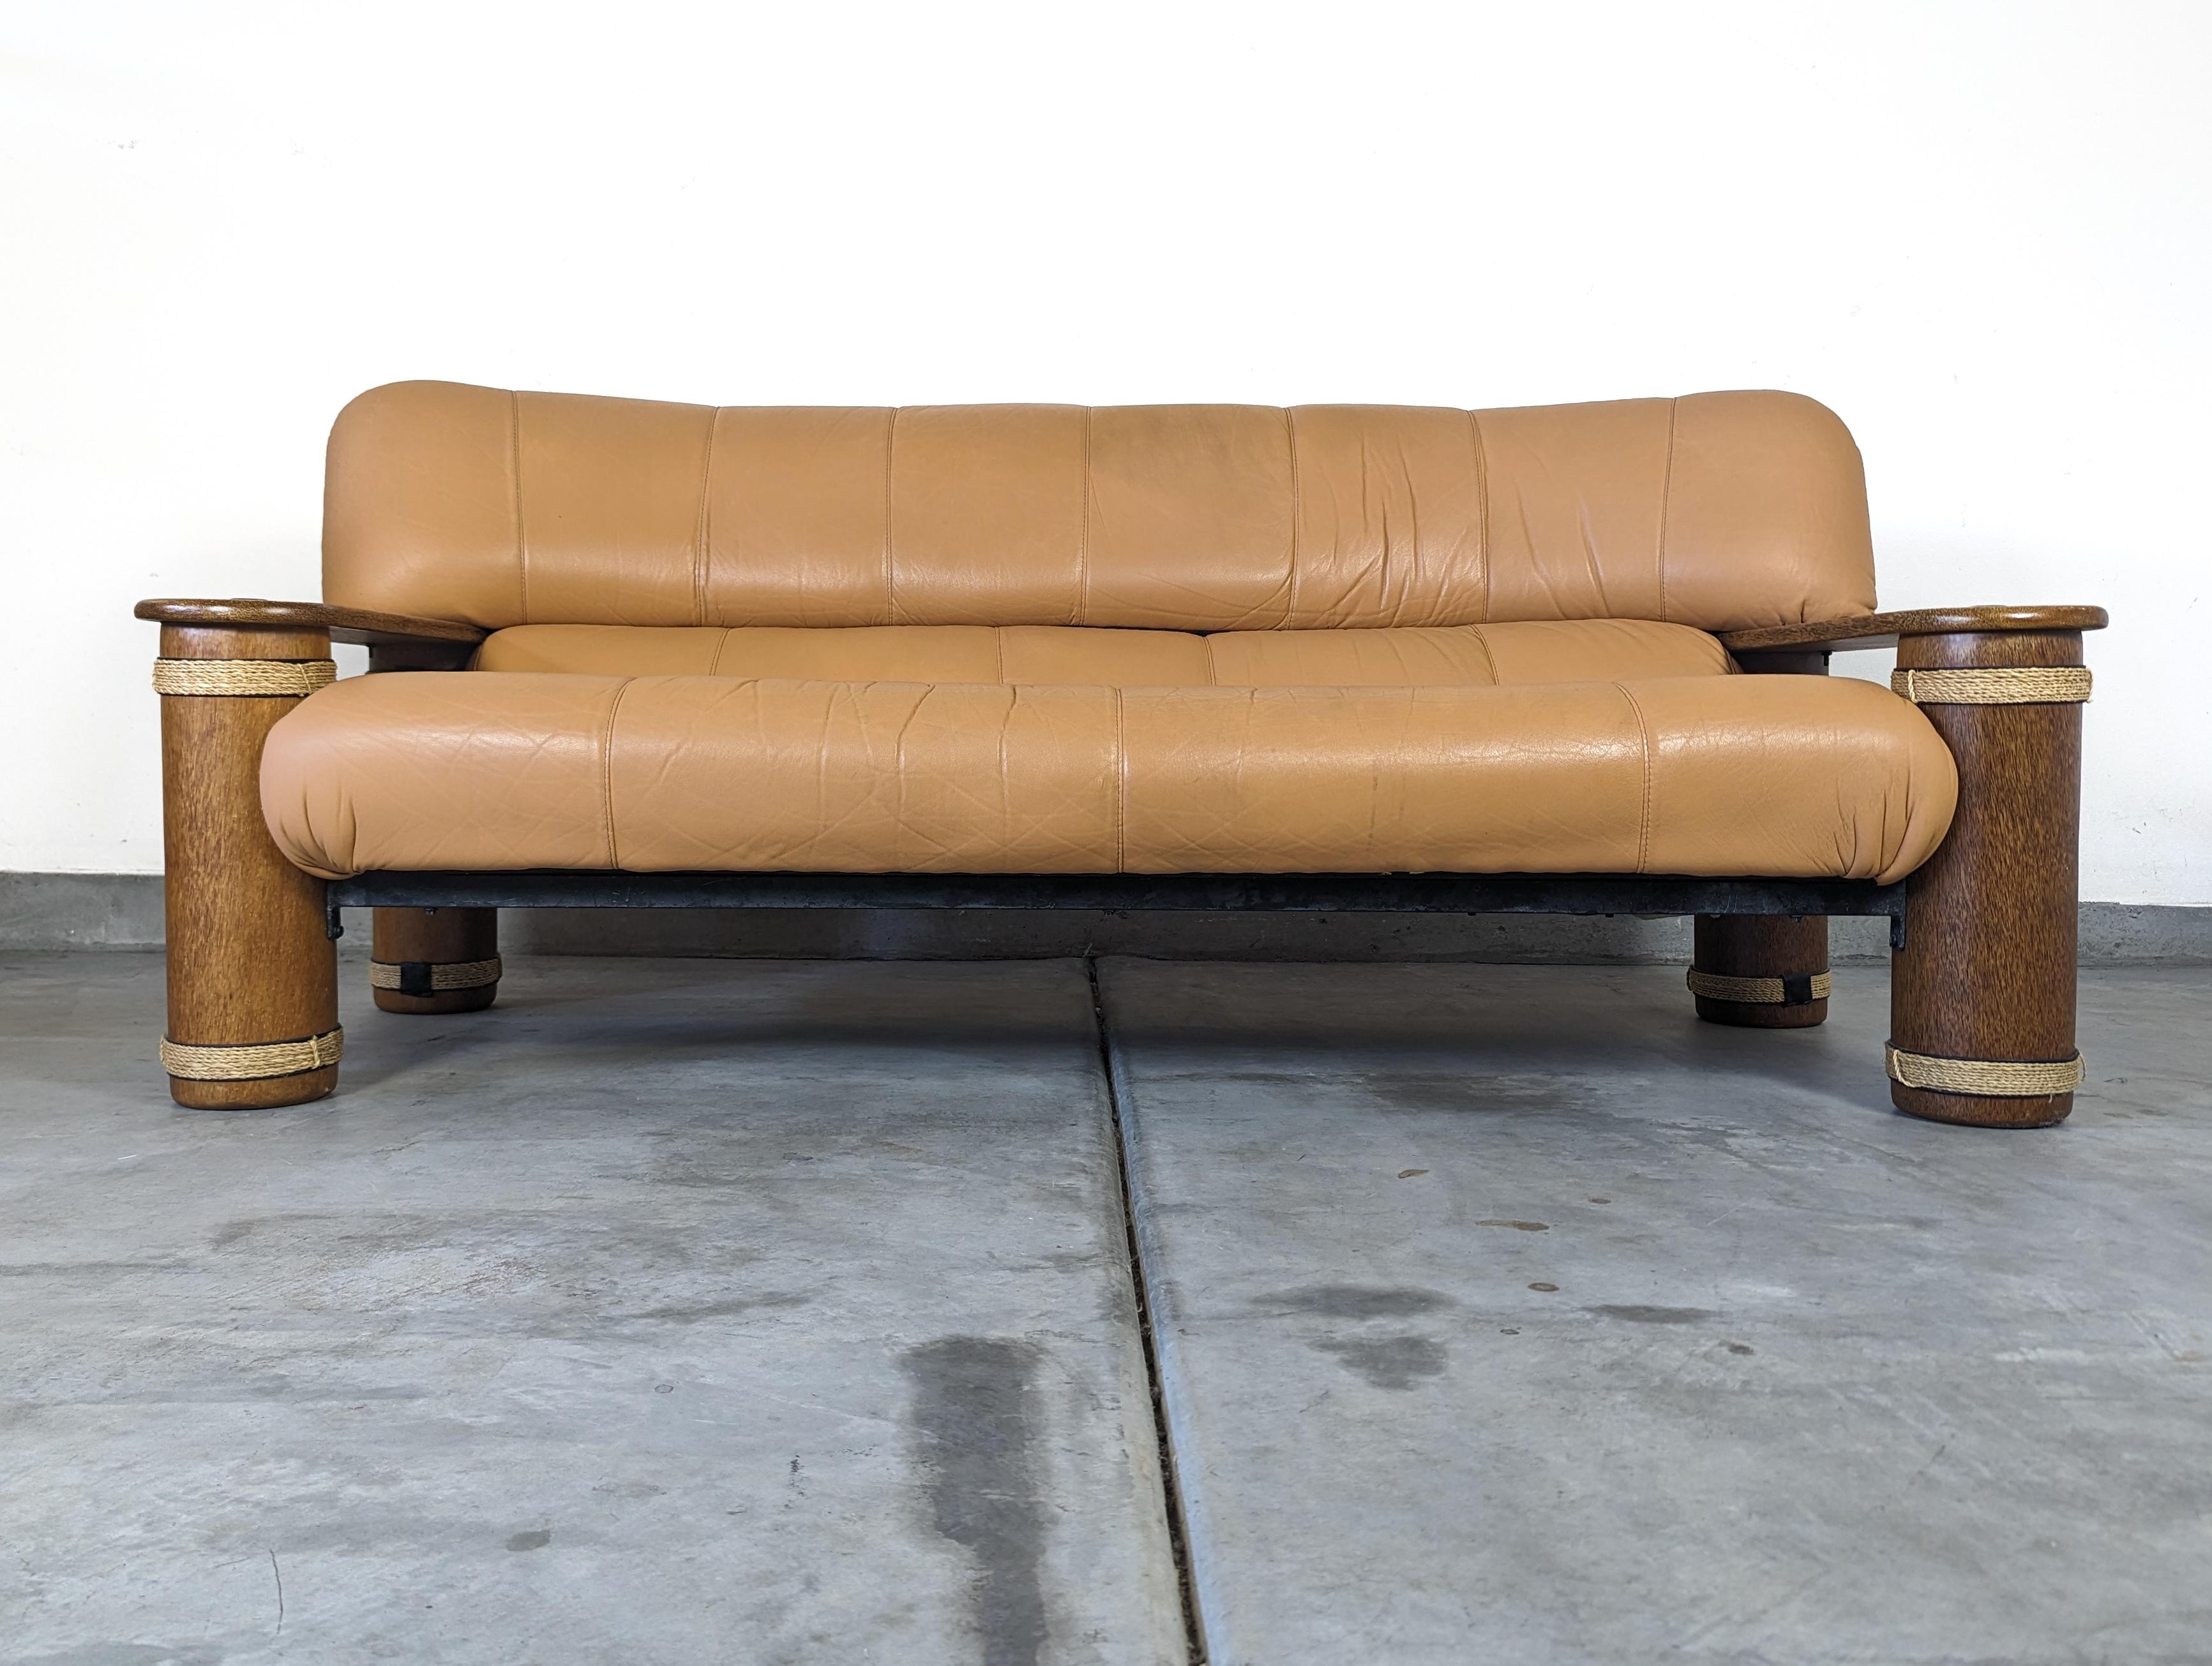 Organic Modern Vintage Leather and Palmwood Three-Seat Sofa by Pacific Green, c1990s For Sale